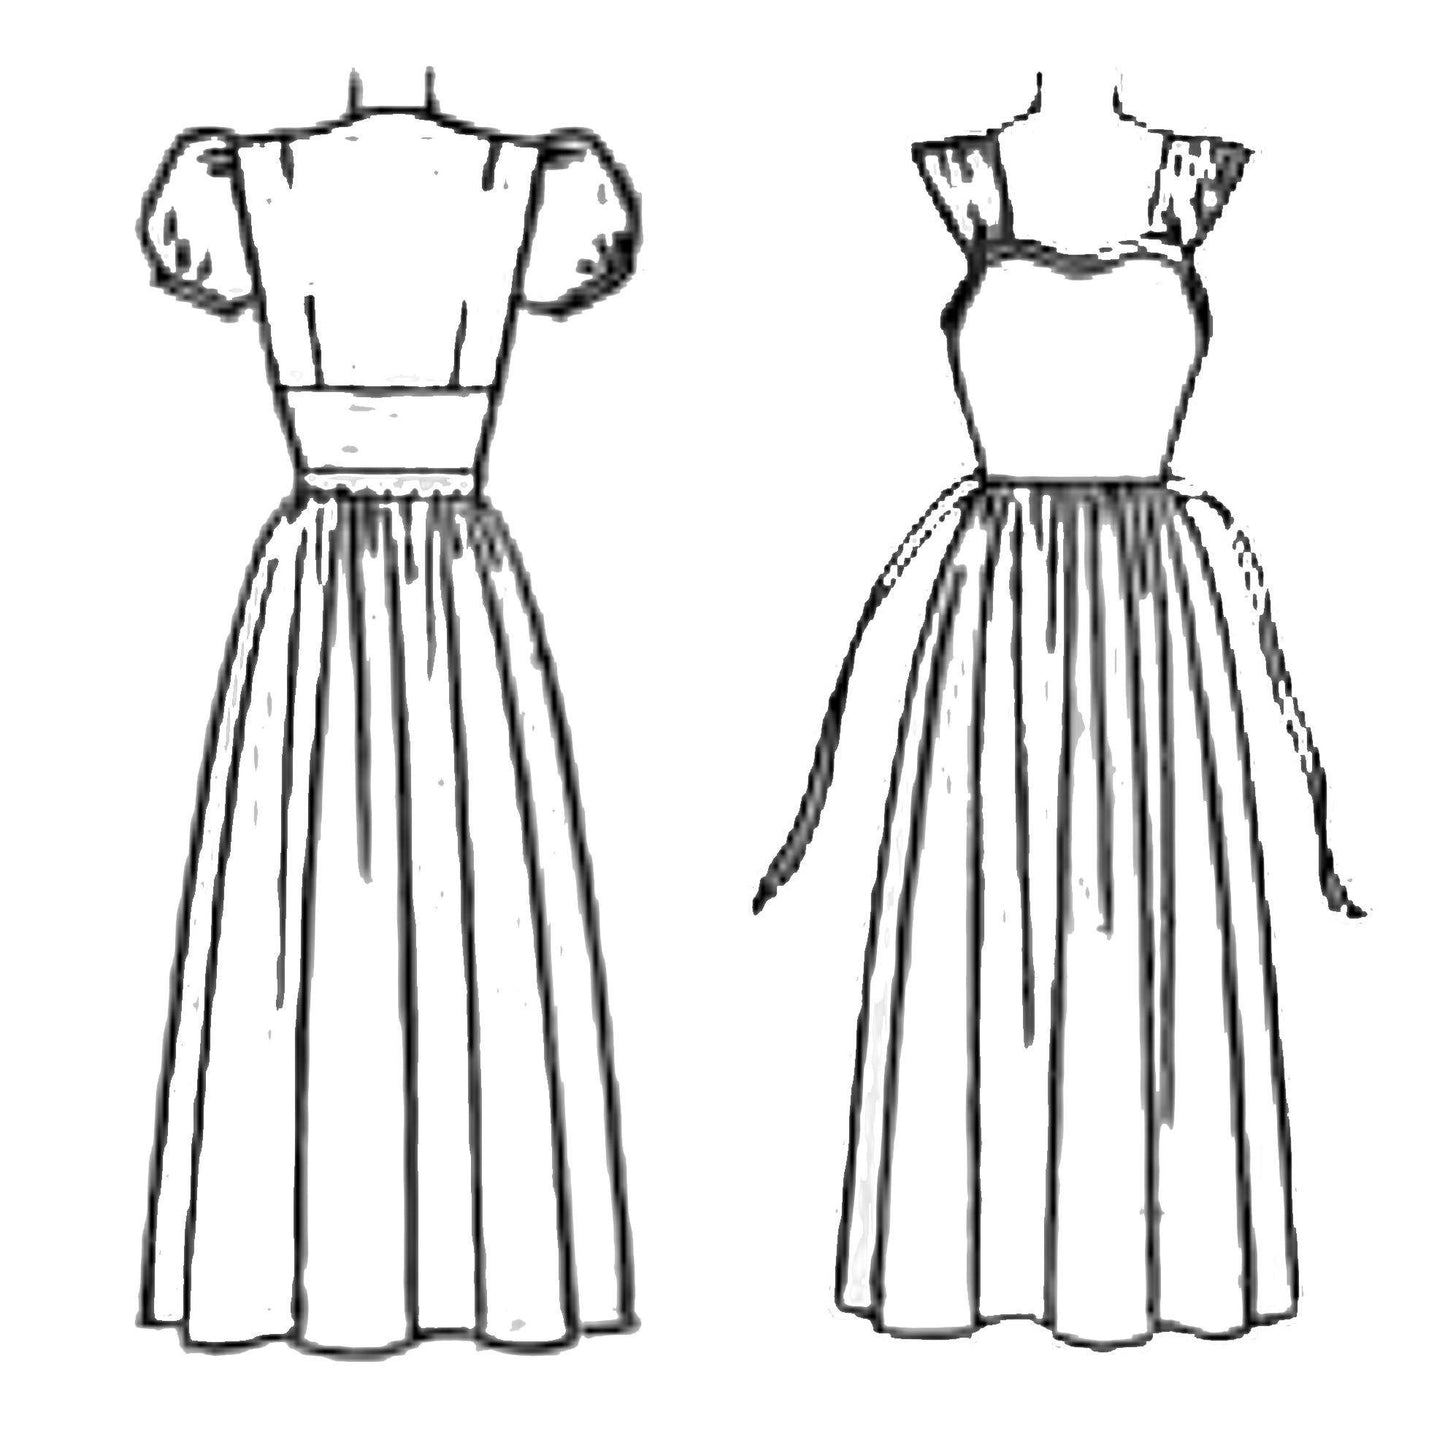 Line drawing of dreses